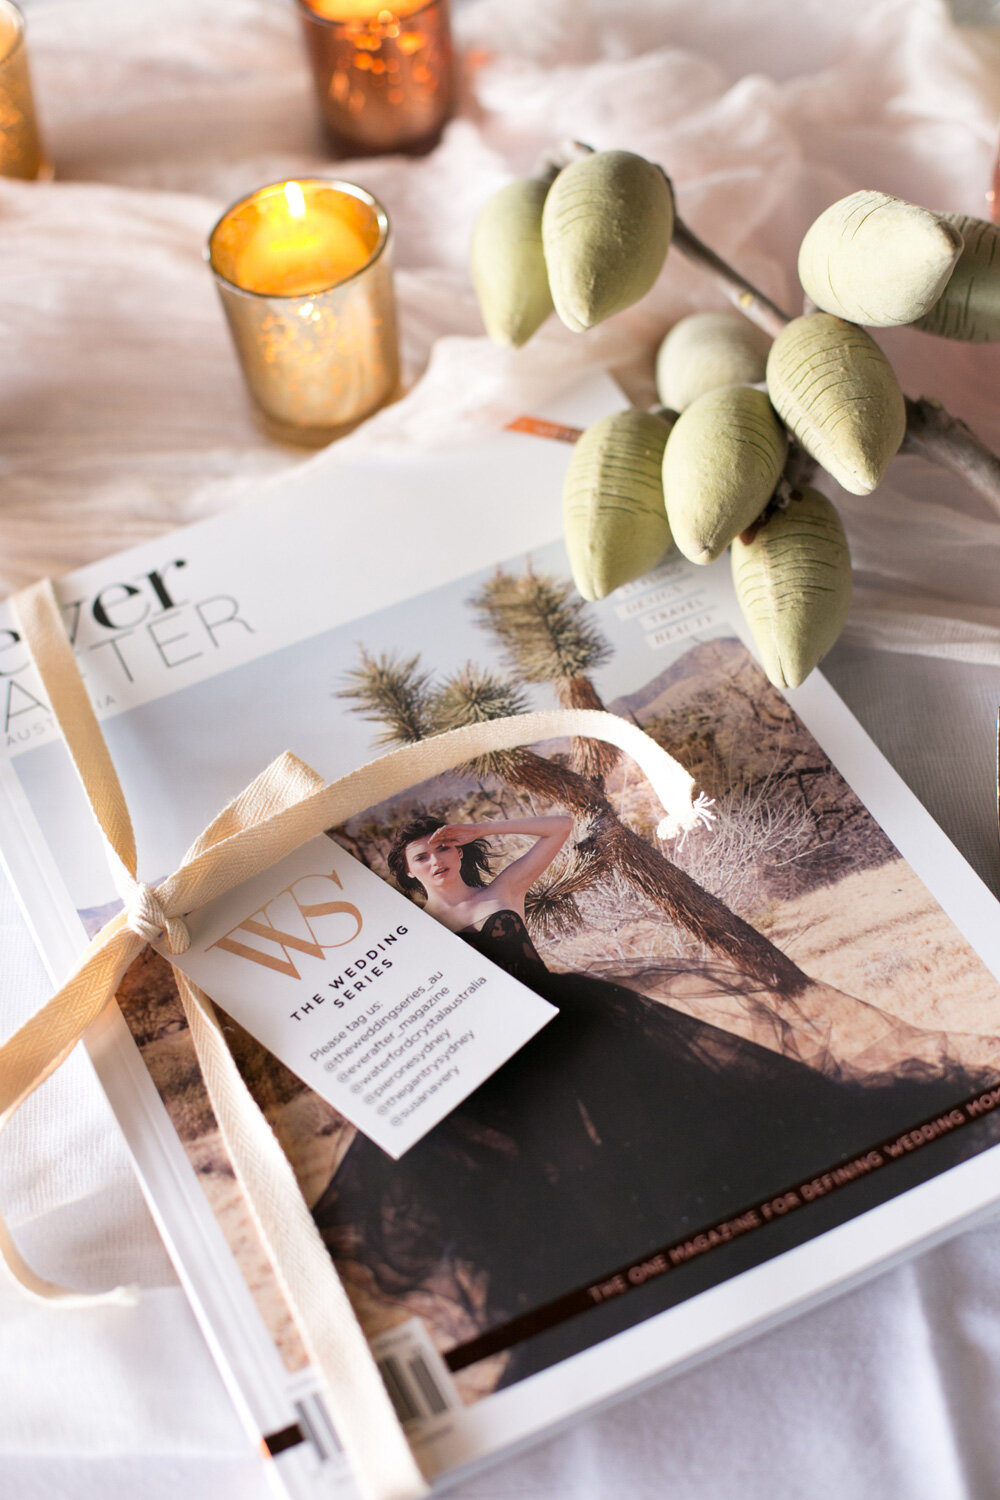 everAfter Magazine, issue 3 | Spring Summer featuring an interview with The Wedding Series Founder Kate O’Shea, view here